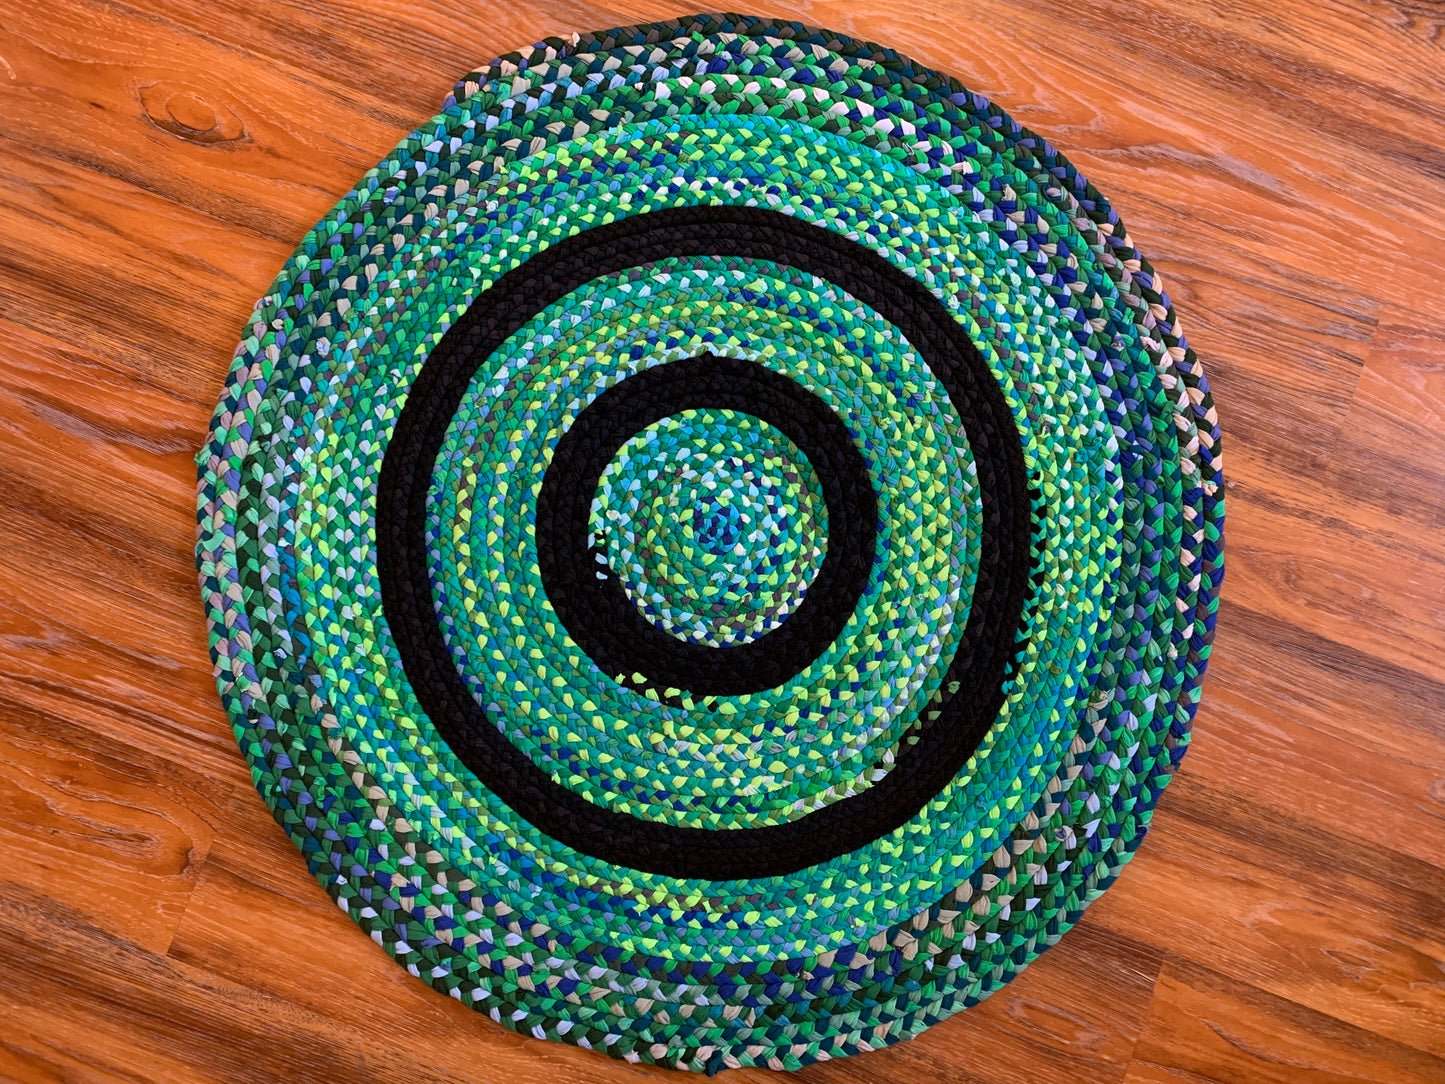 aerial view of green monet tshirt rug, with various greens sparkling throughout, and two black strips to form a bullseye